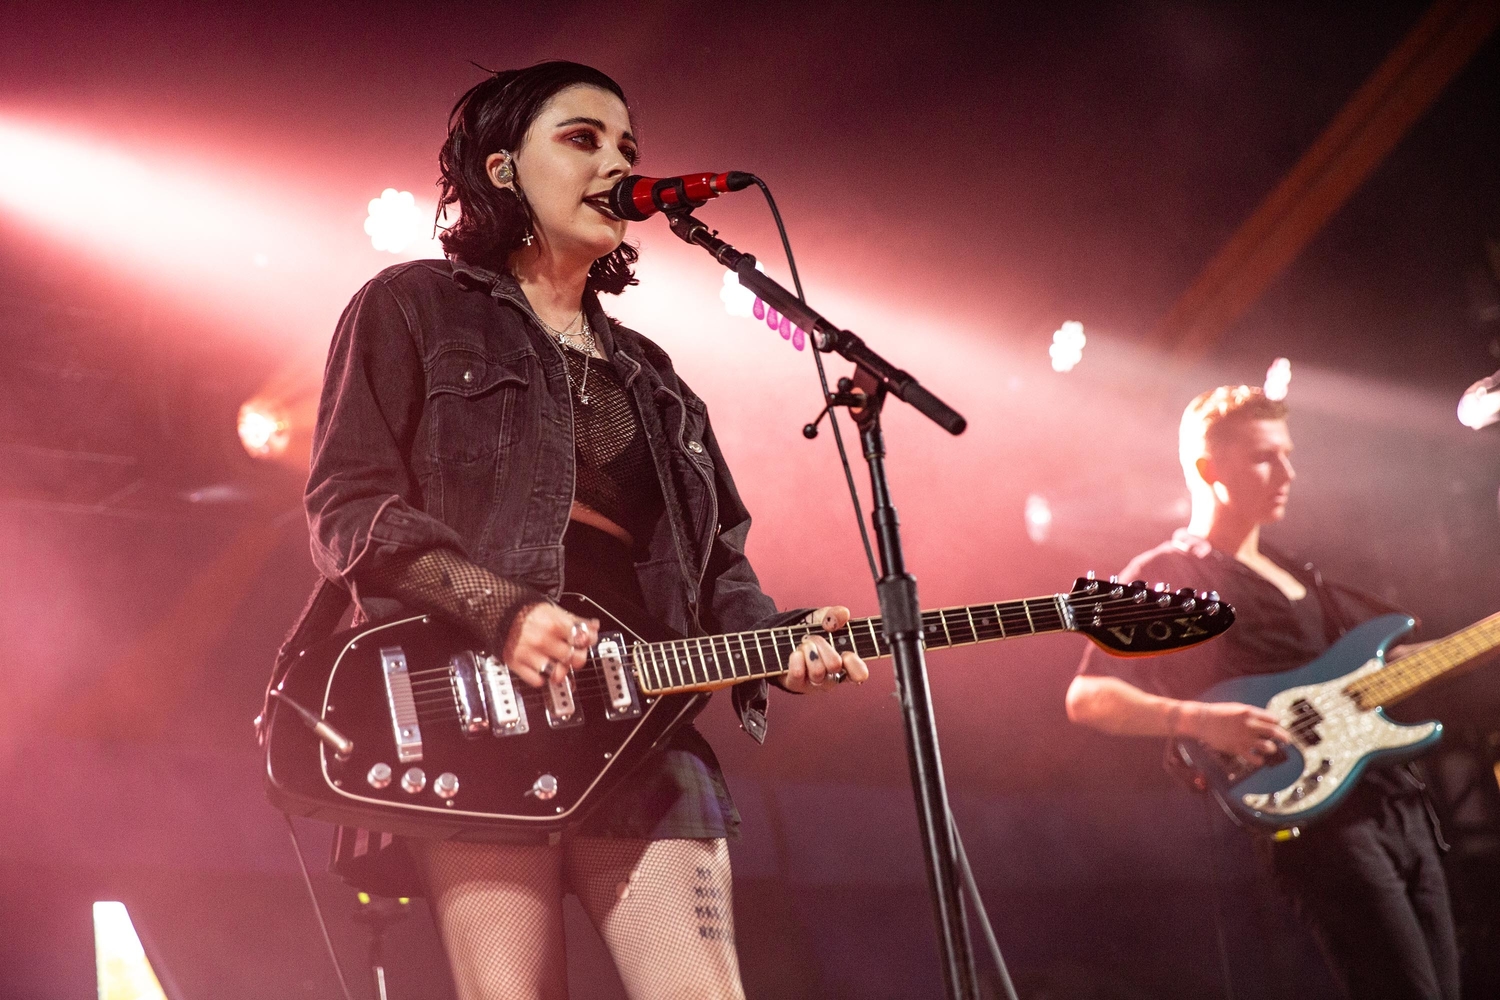 Pale Waves to headline 2020 edition of Liverpool’s Sound City